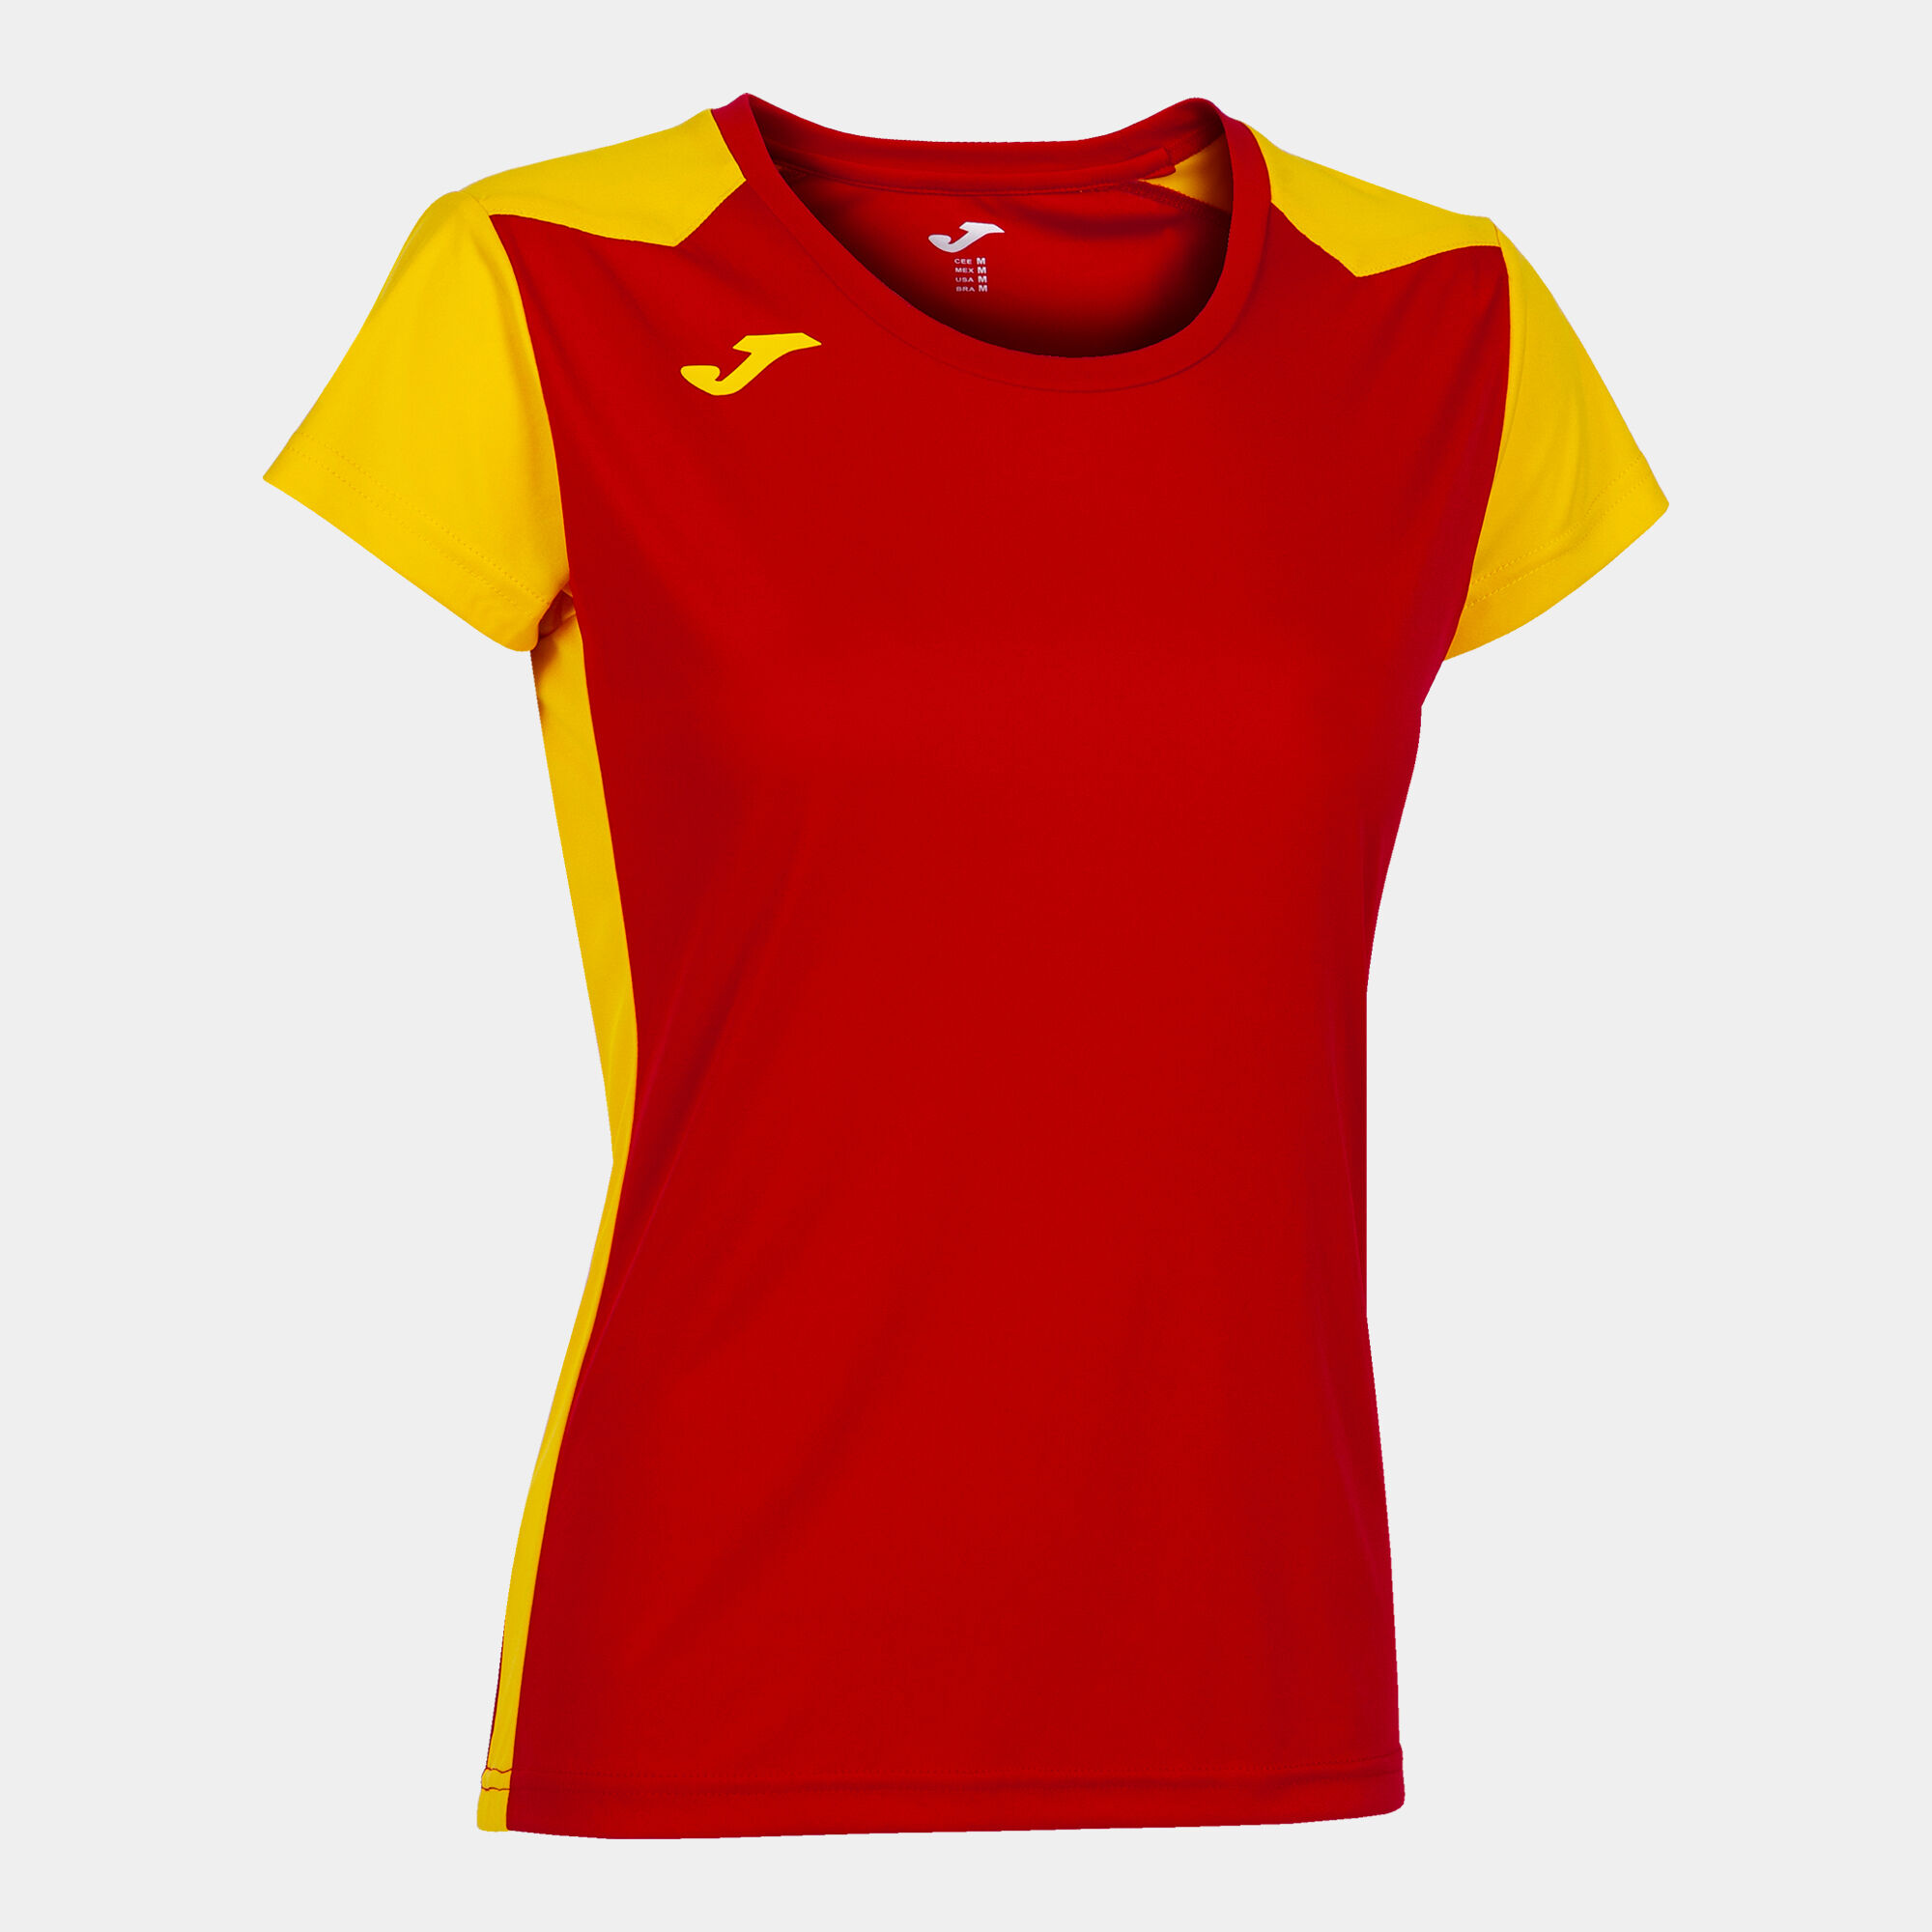 MAILLOT MANCHES COURTES FEMME RECORD II ROUGE JAUNE